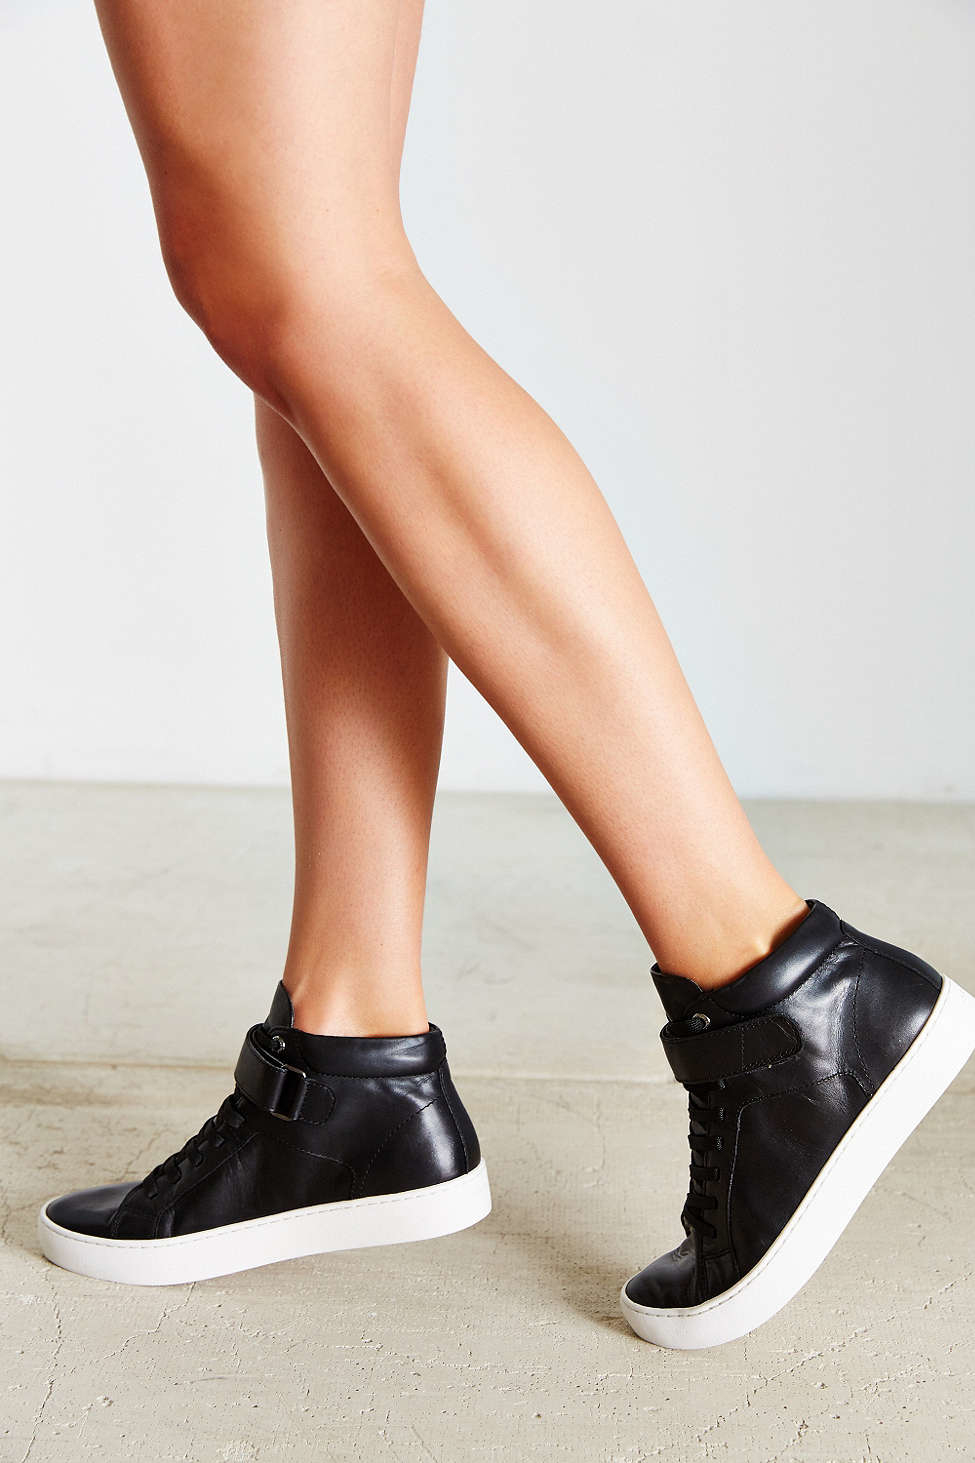 Vagabond Leather Zoe High-top Sneaker in Black - Lyst